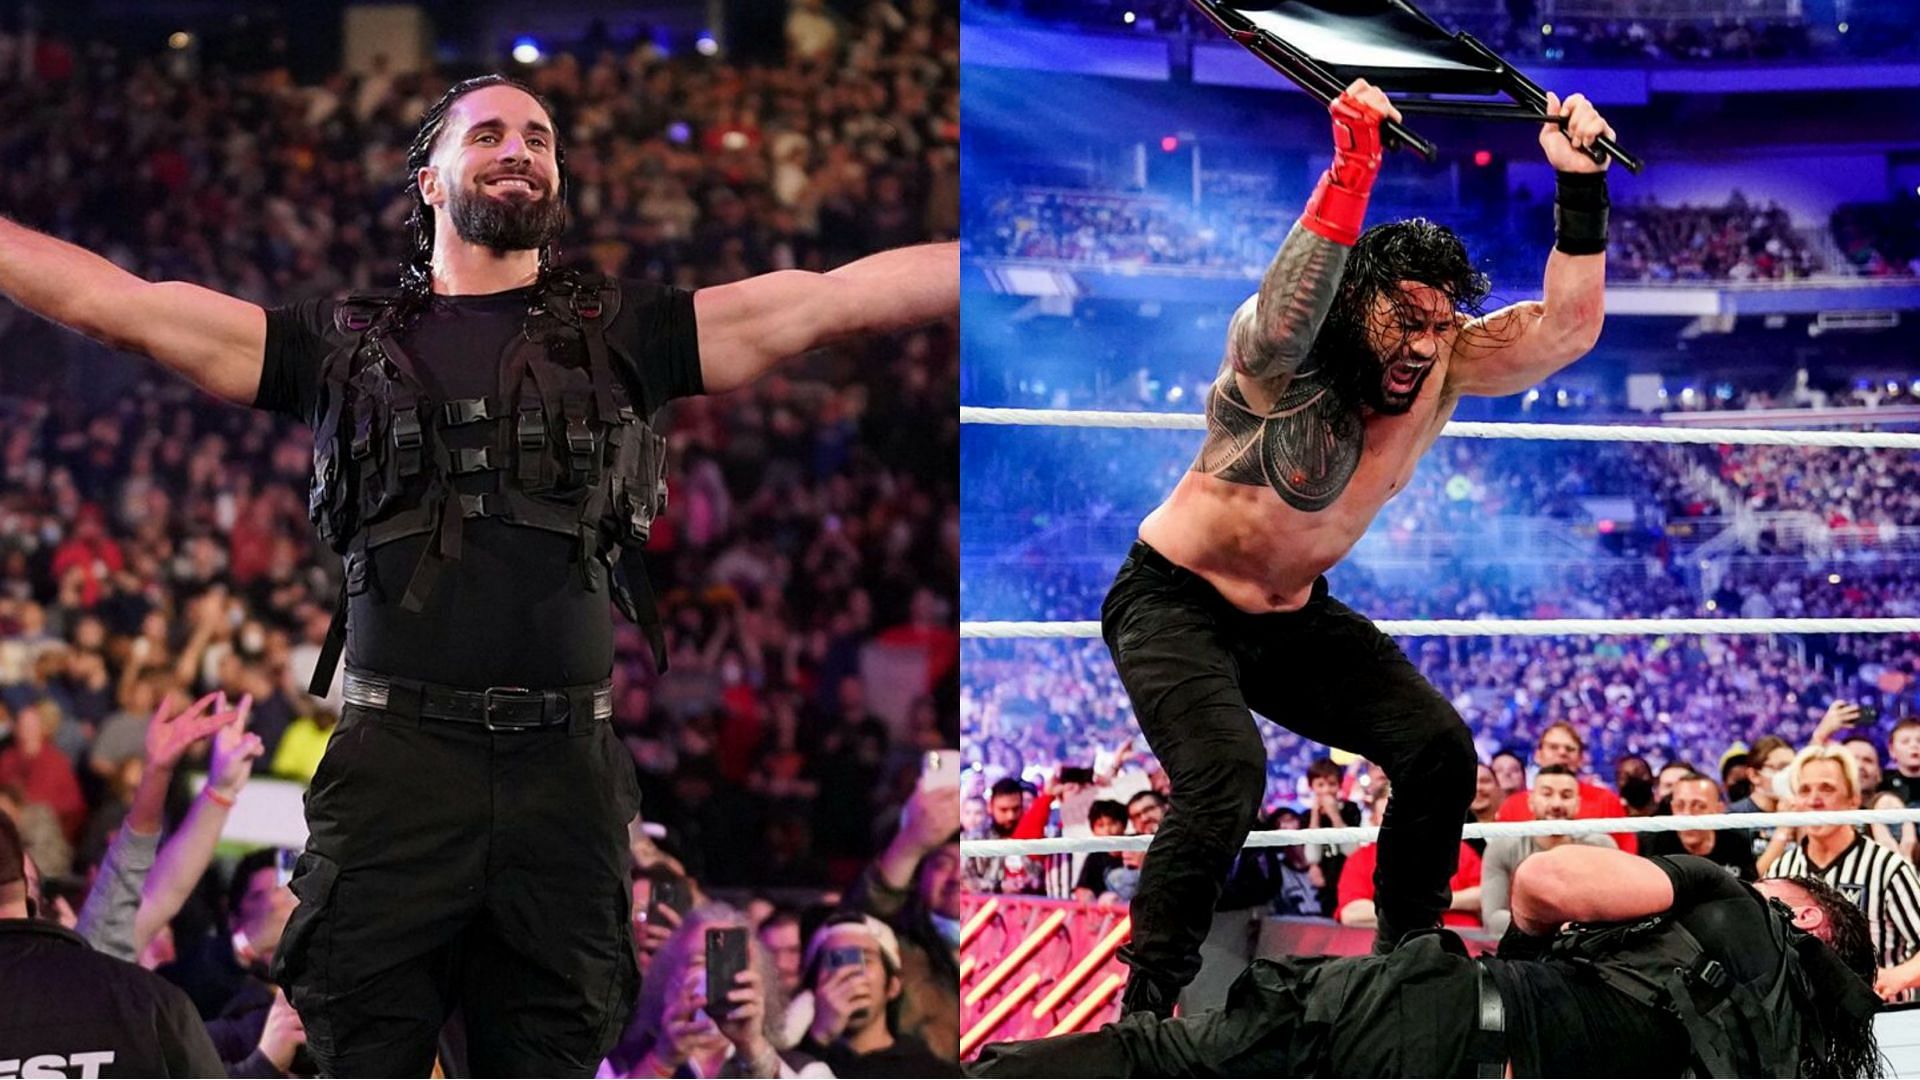 What will Rollins do at WrestleMania?